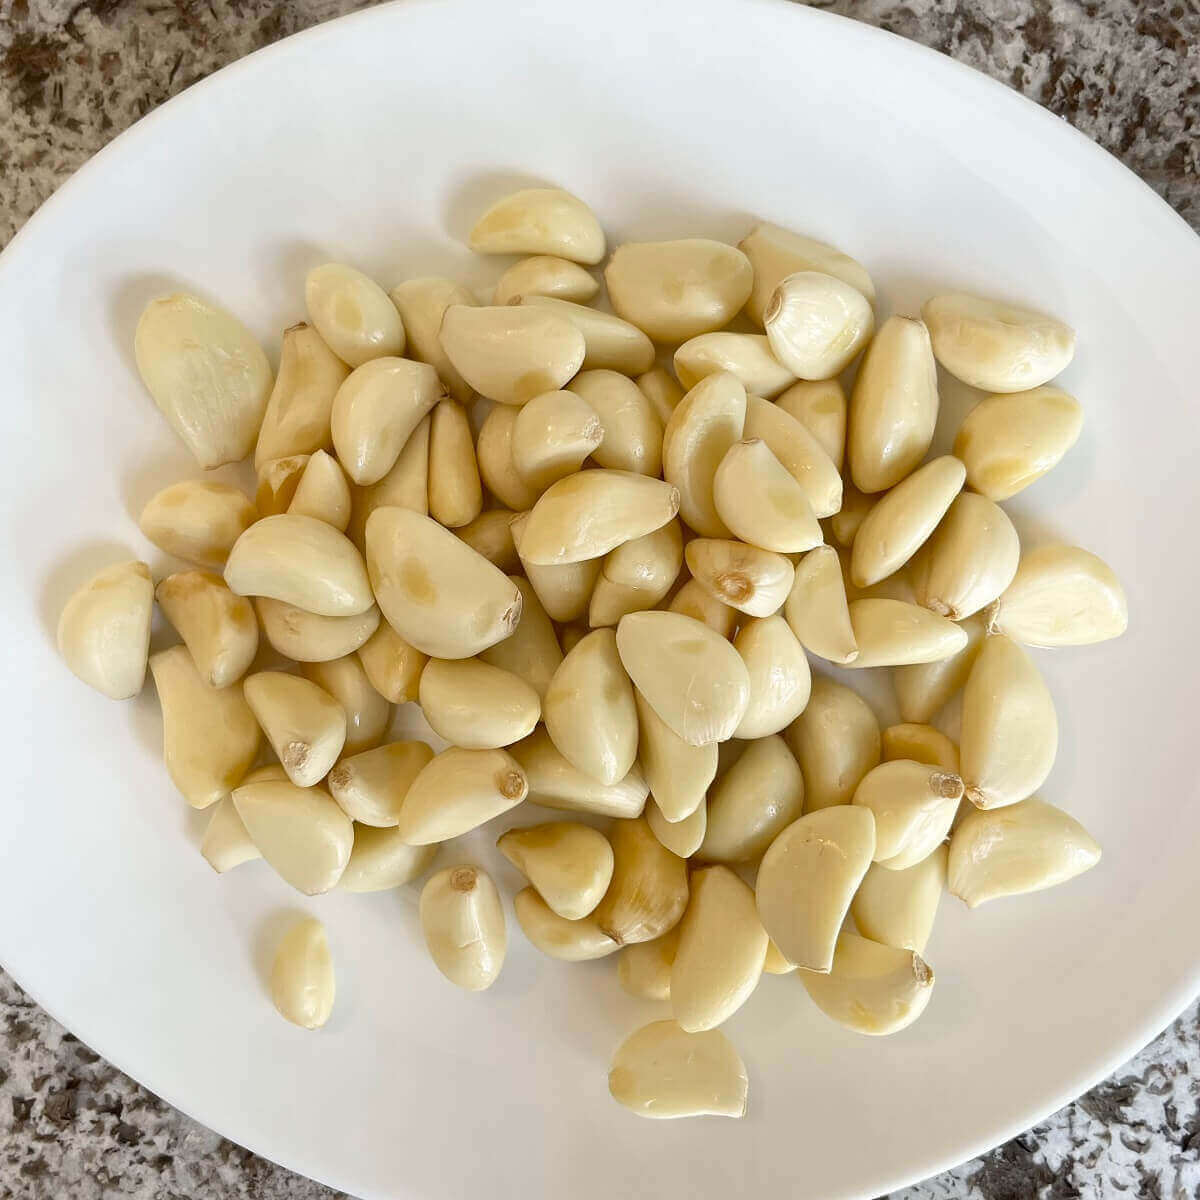 A pile of peeled garlic cloves on a white plate.